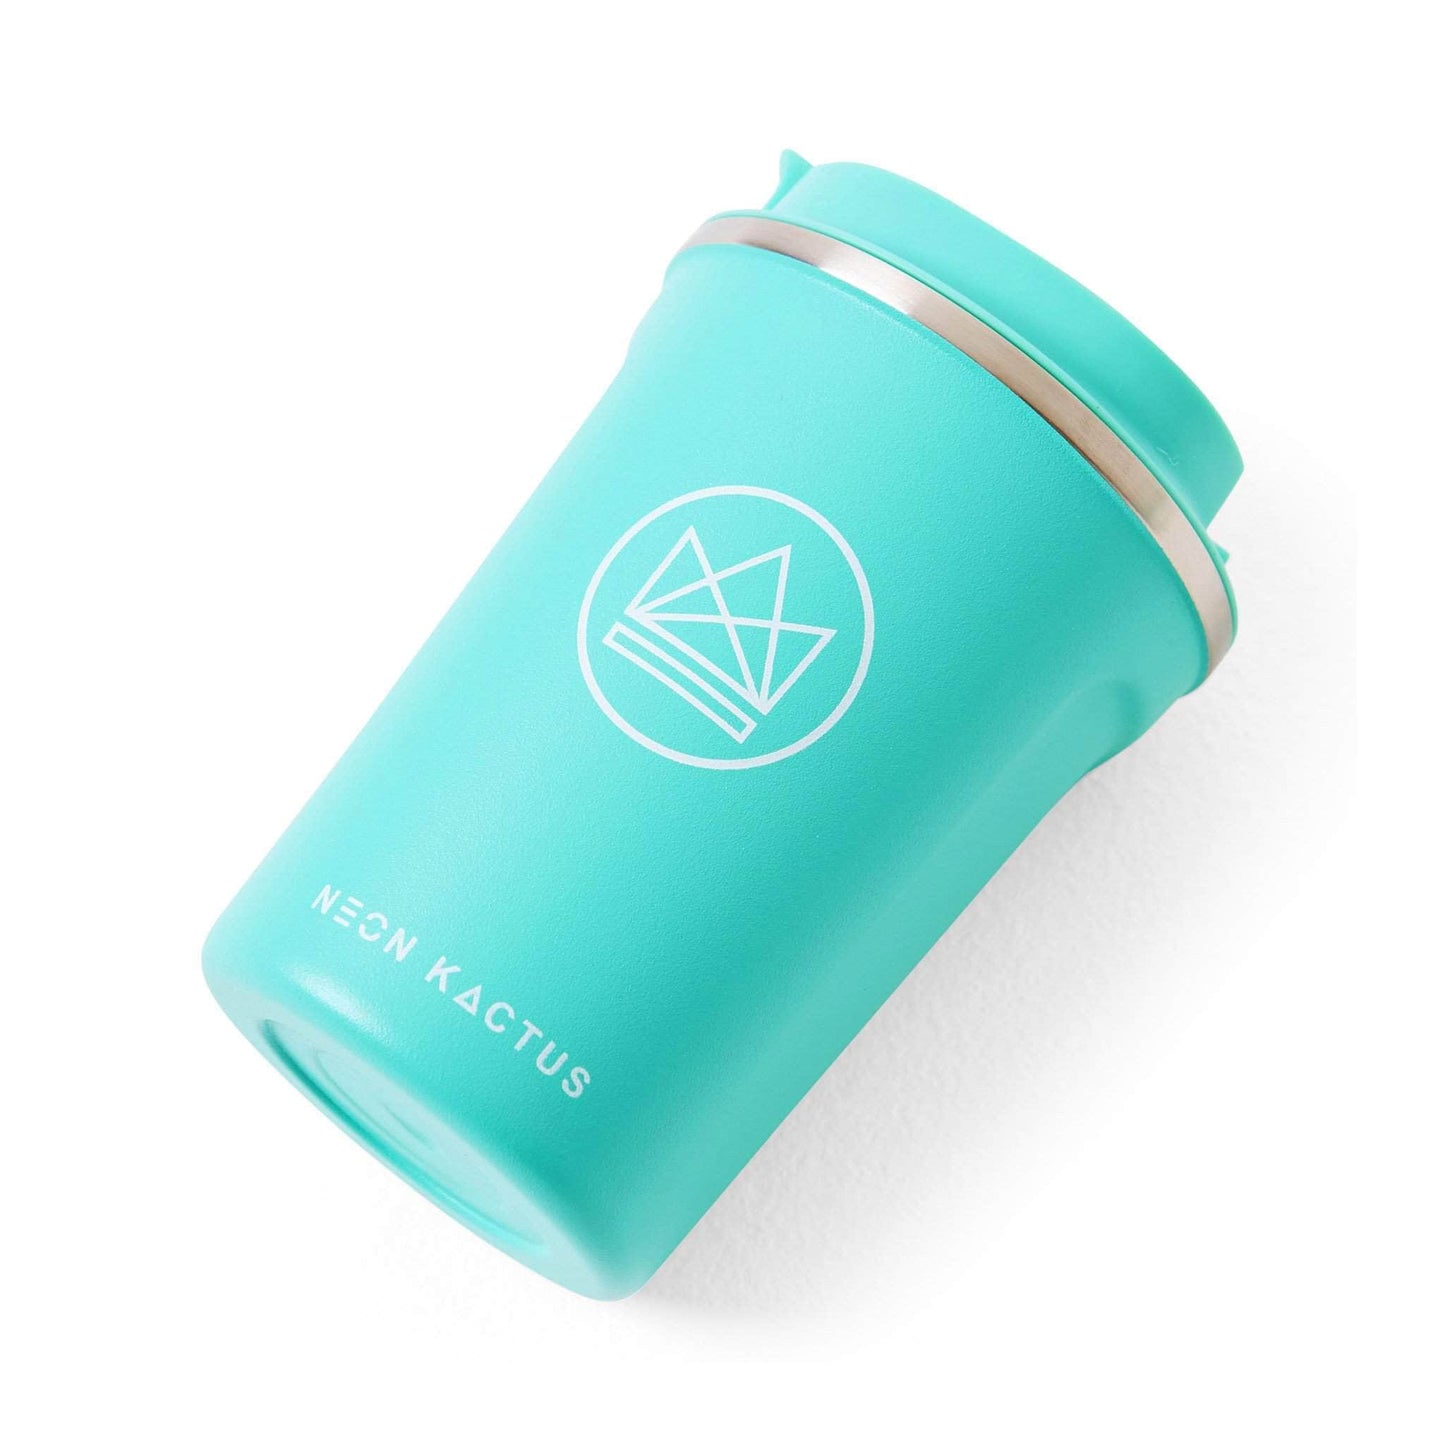 Load image into Gallery viewer, Neon Kactus Coffee Cup Stainless Steel Insulated Coffee Cup - 12oz - Free Spirit Turquoise
